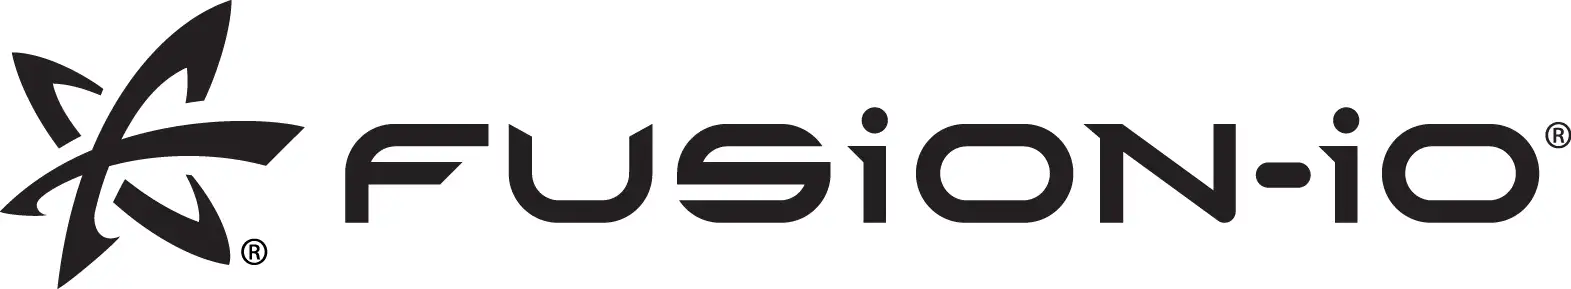 Fusion-io (Merged with SanDisk Corp.)